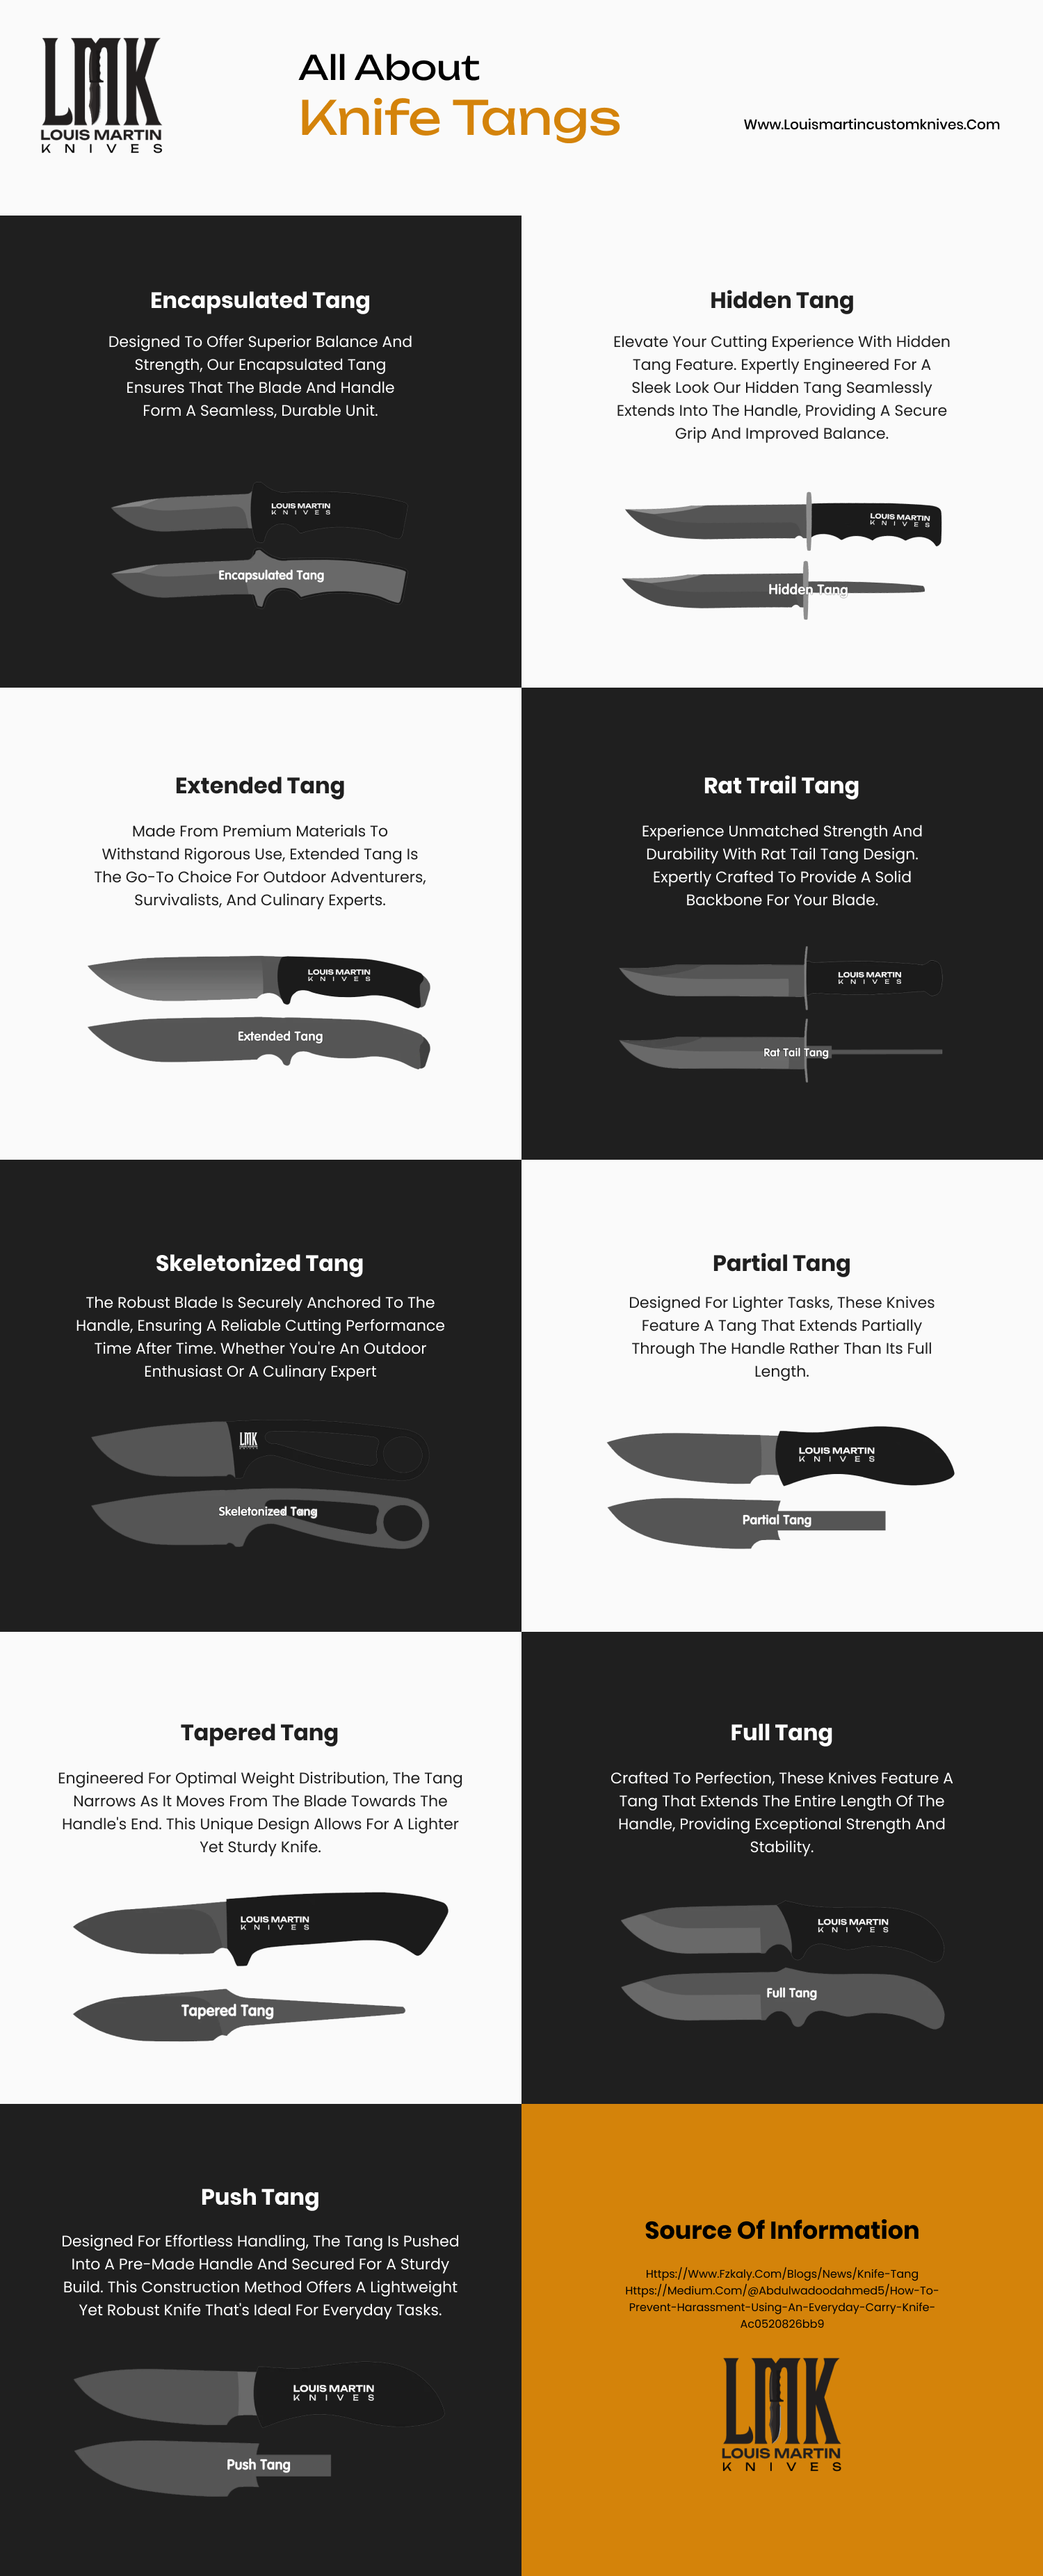 All about knife tangs